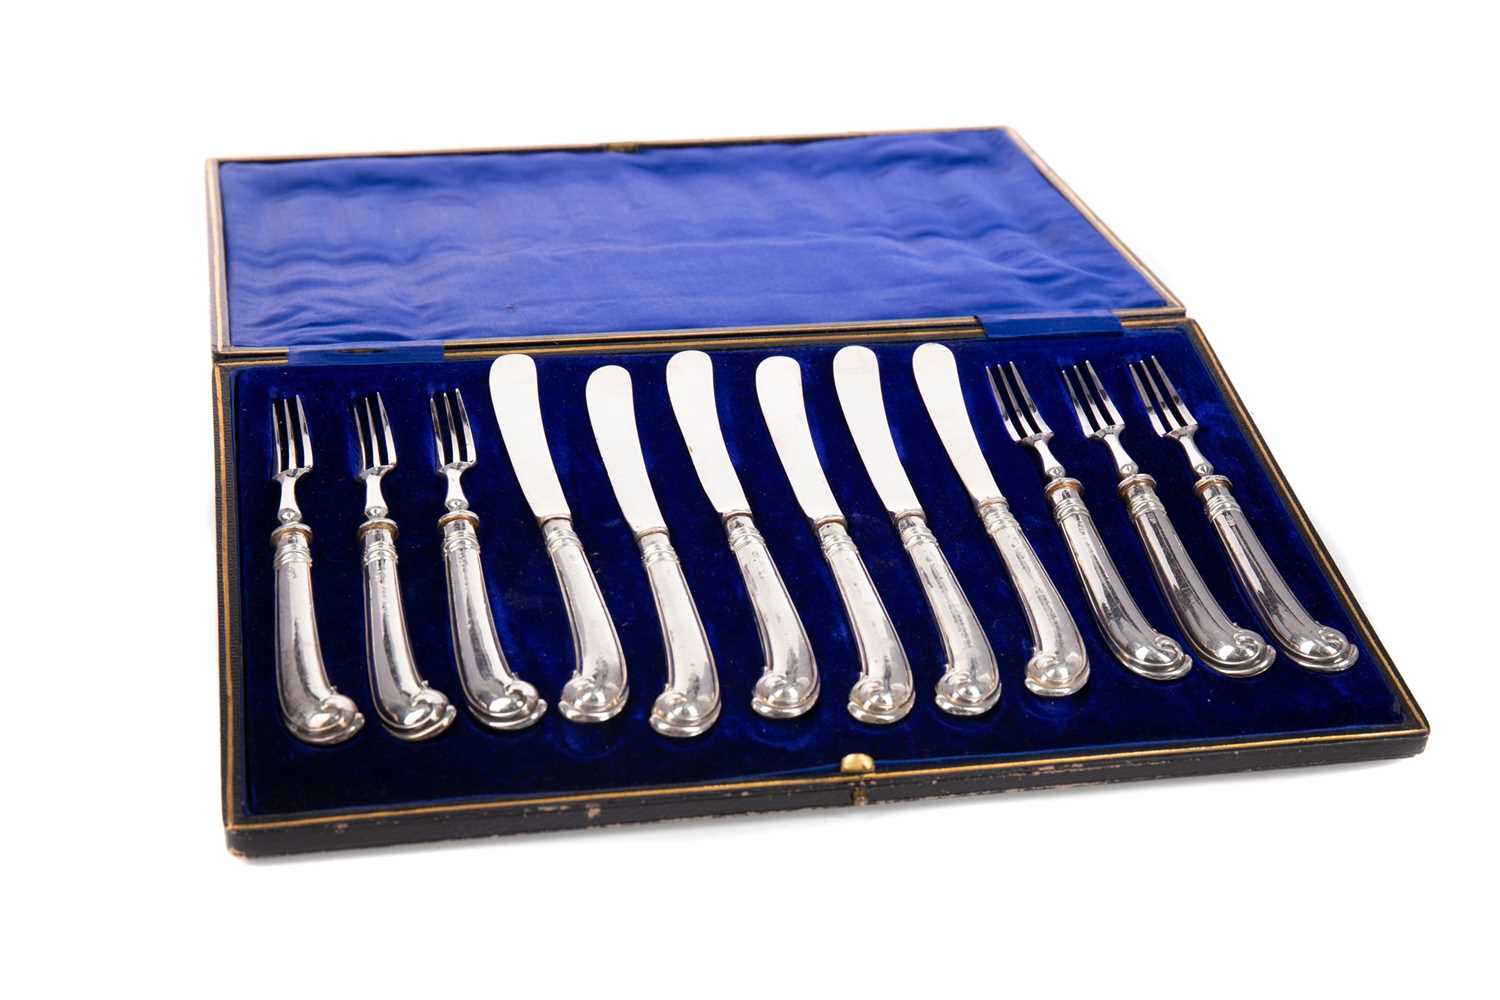 Lot 548 - A SET OF SIX EDWARDIAN SILVER HANDLED FRUIT KNIVES AND FORKS